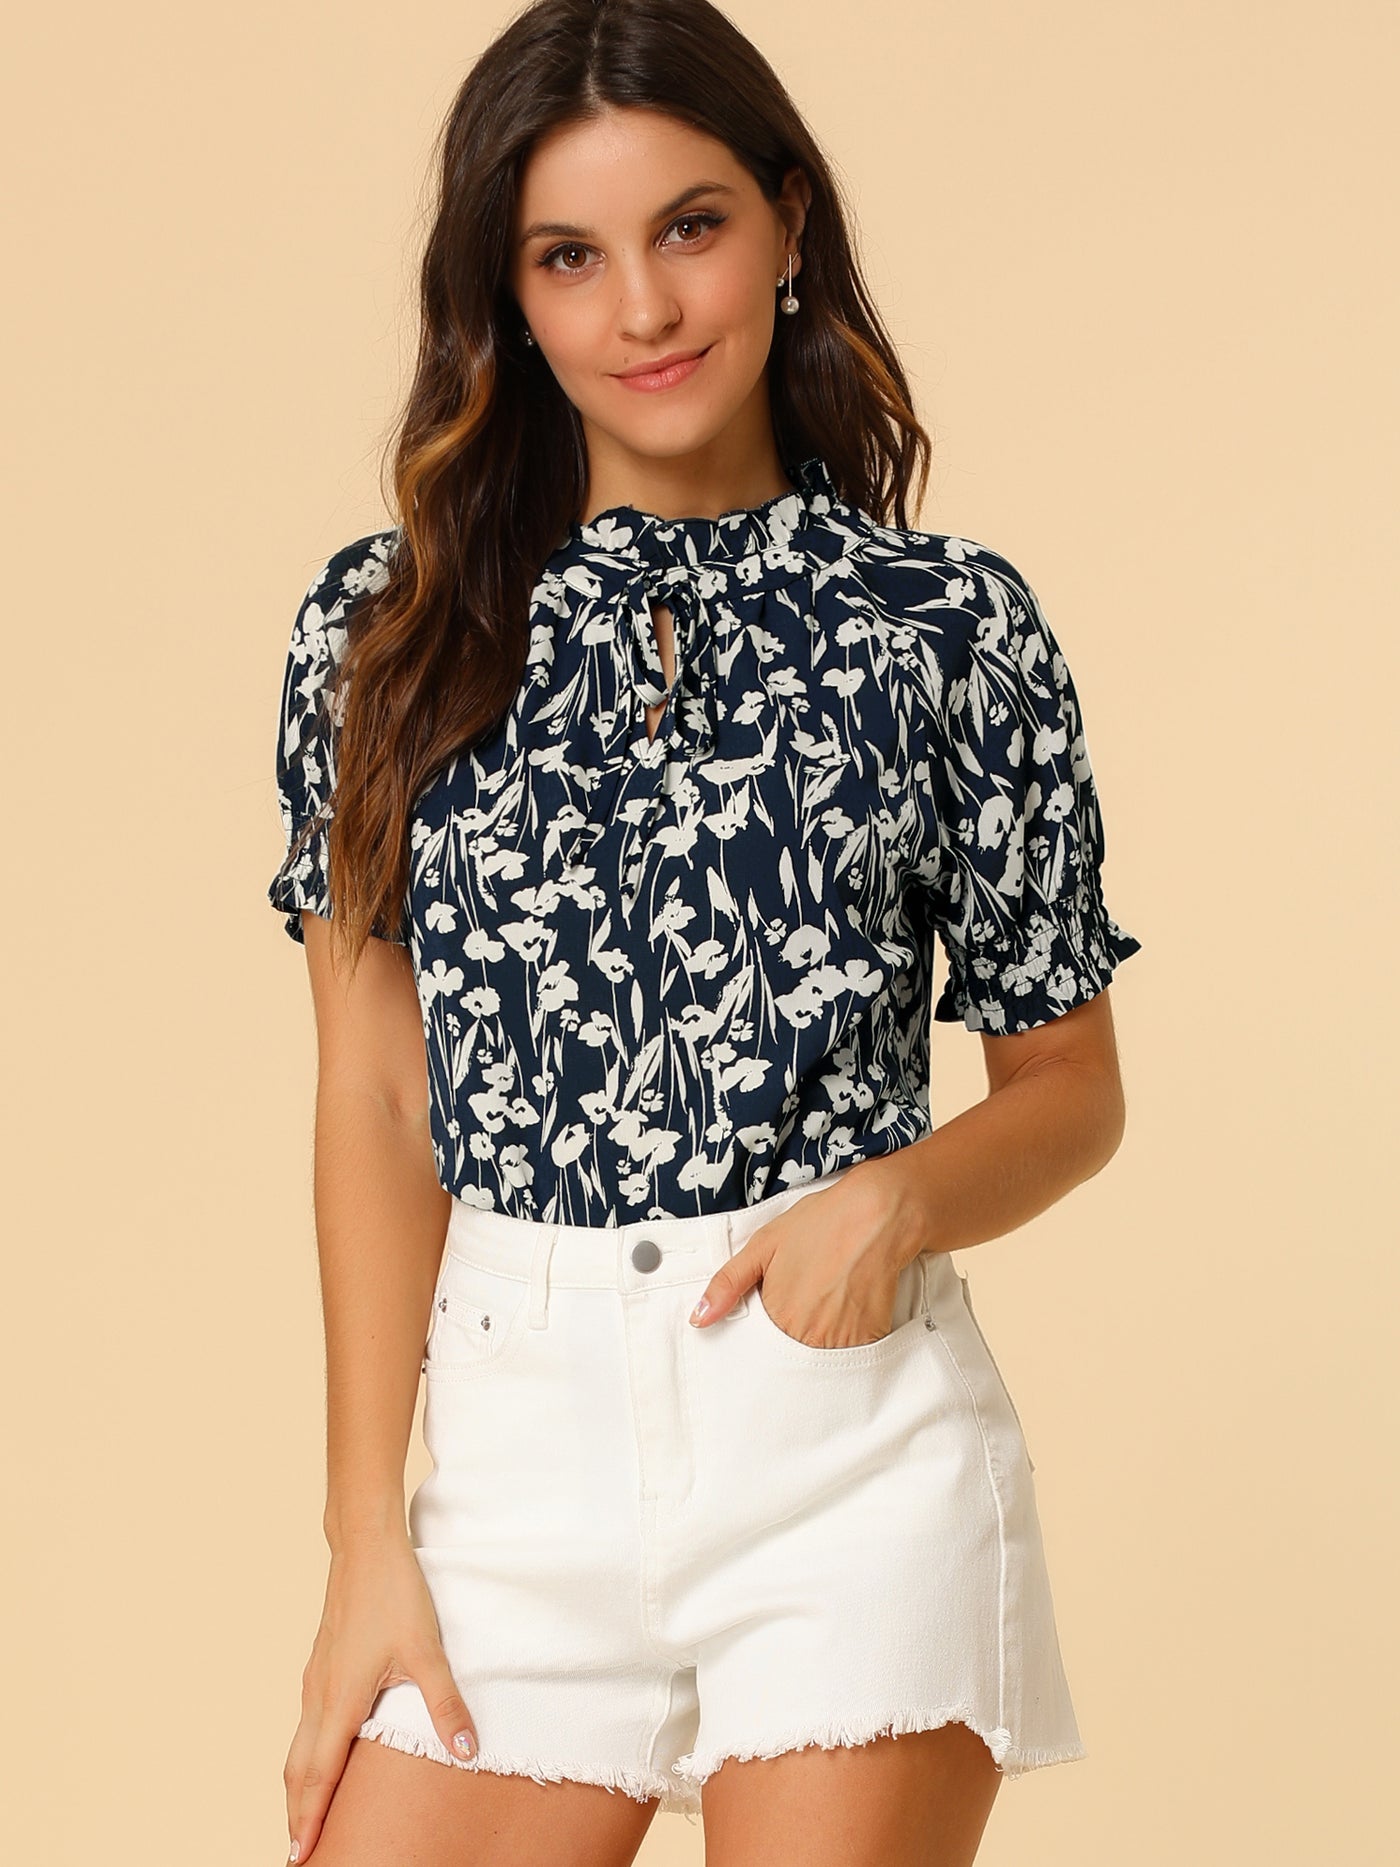 Allegra K Ruffle Tie V Neck Casual Smocked Short Sleeve Floral Top Blouse